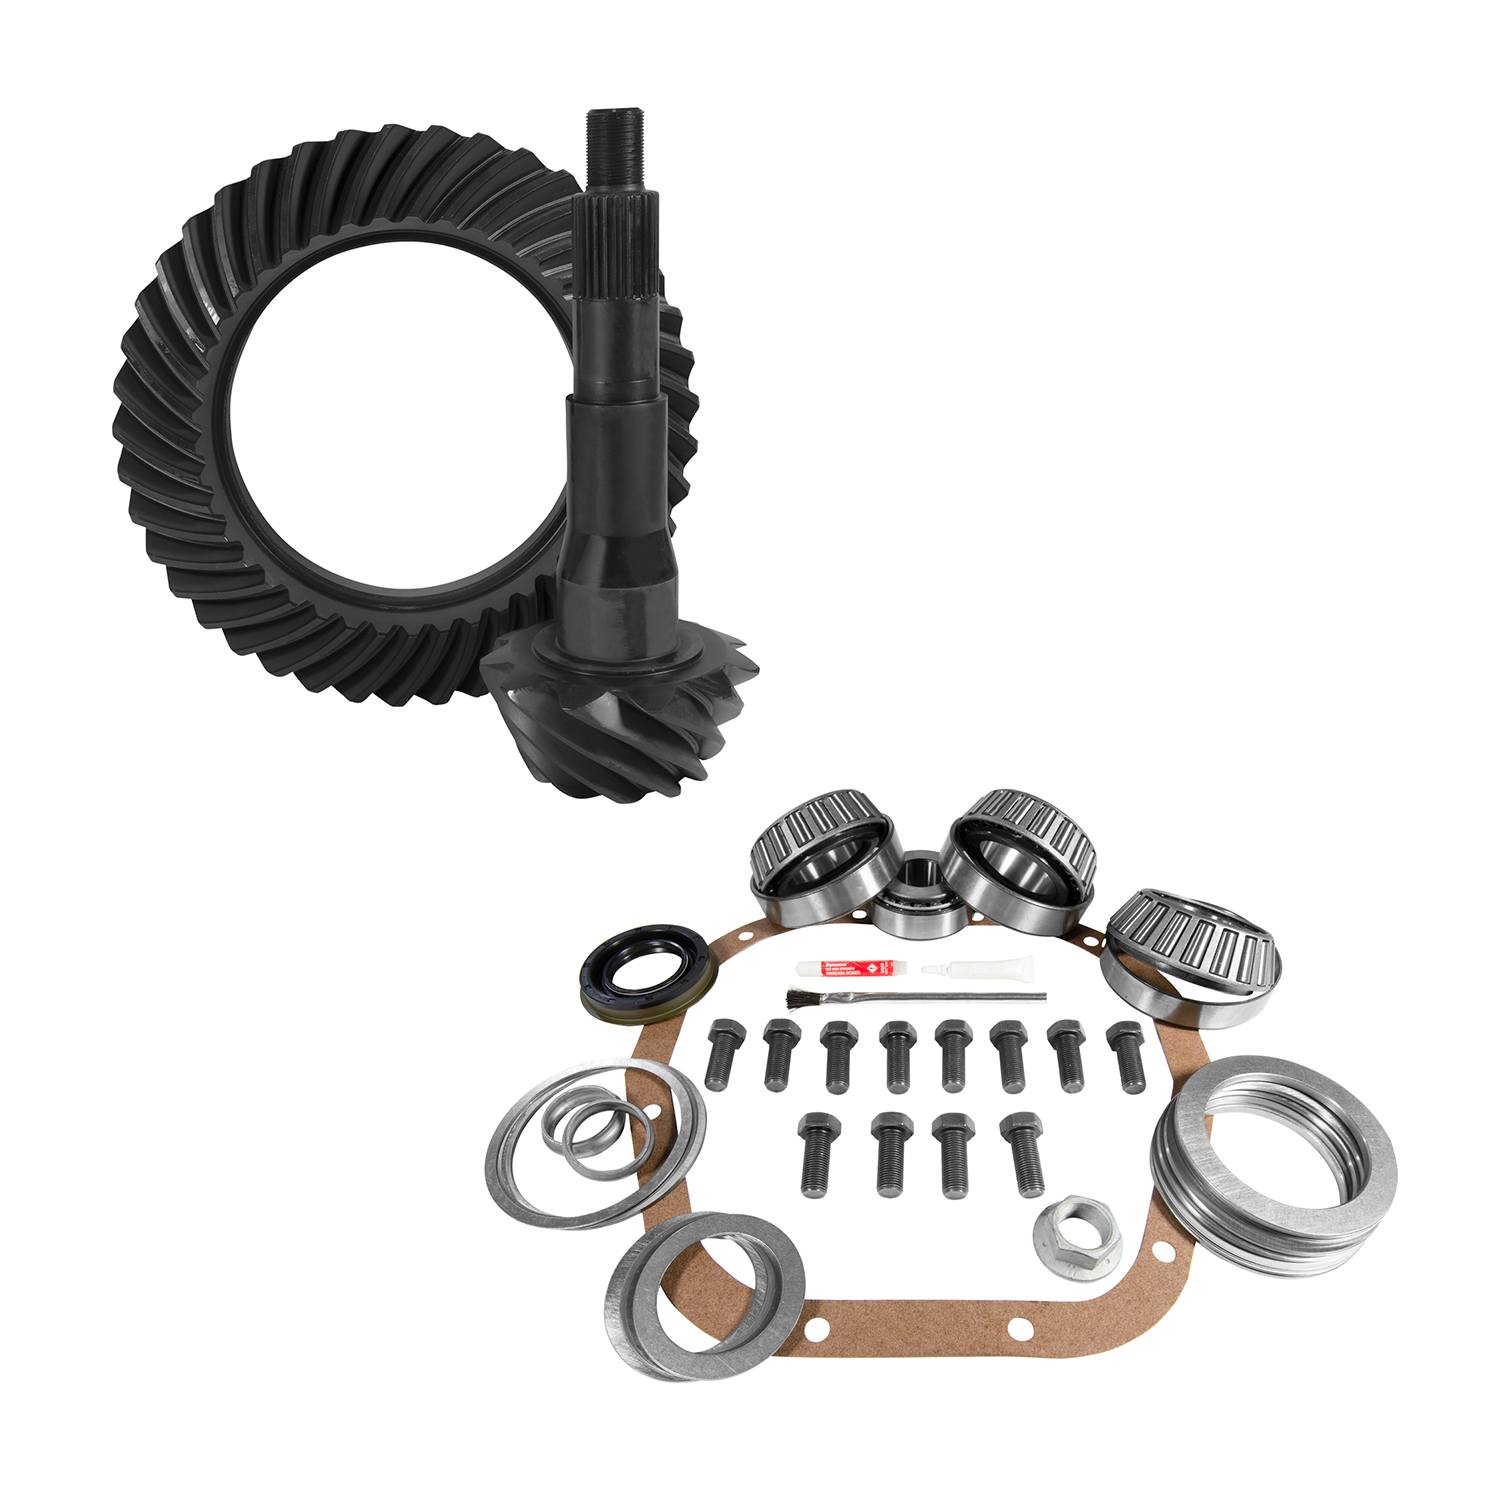 10.5" Ford 4.11 Rear Ring & Pinion and Install Kit 